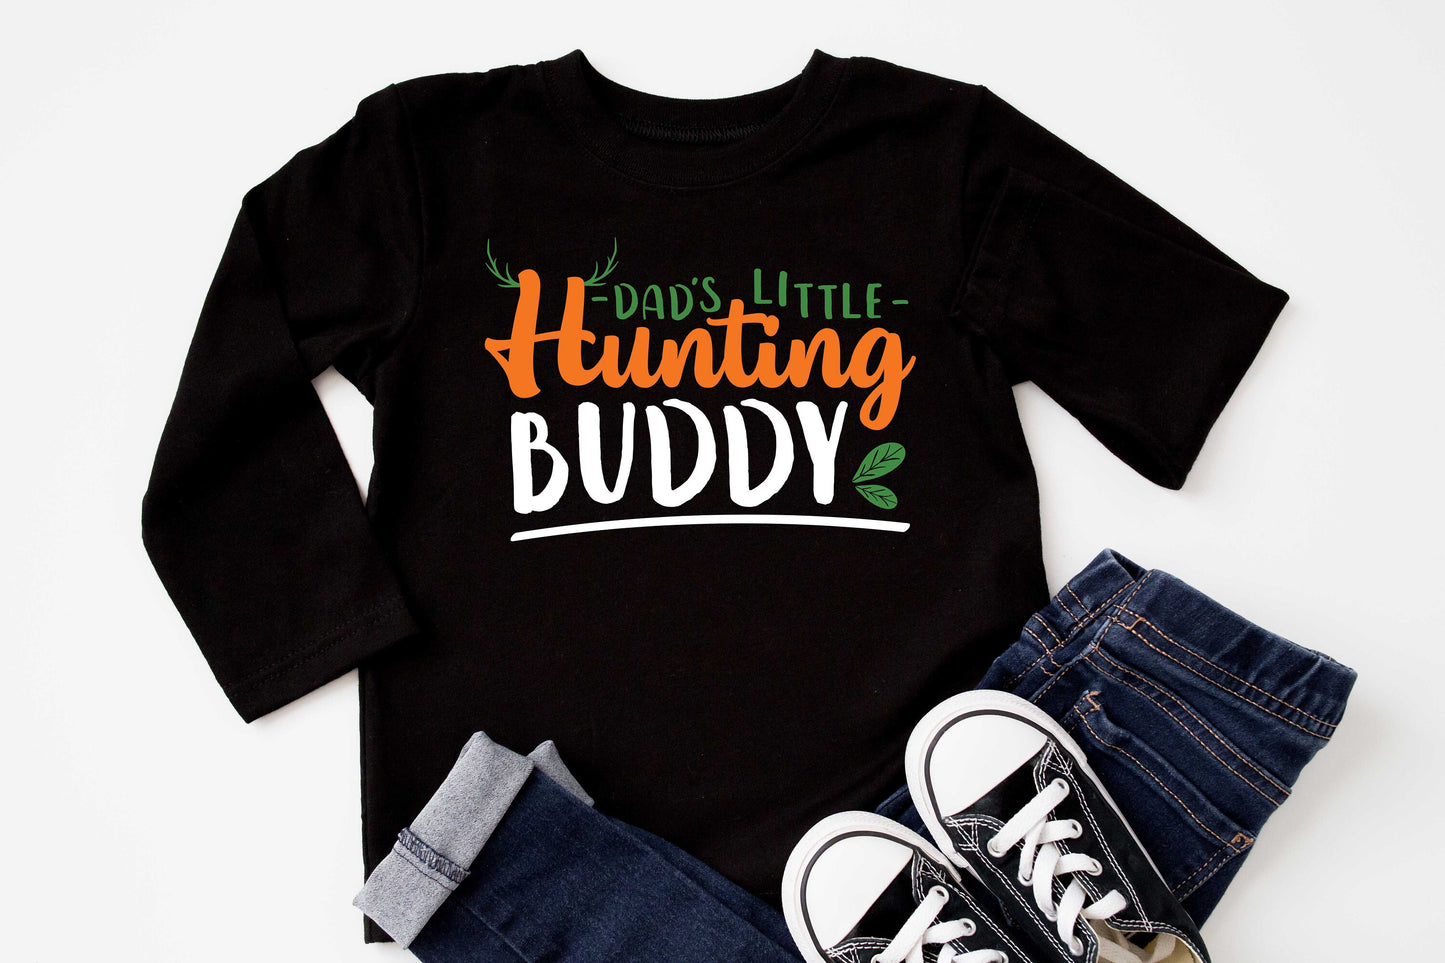 Dad's Little Hunting Buddy Infant or Youth Shirt or Bodysuit - Future Hunter - Daddy's Hunting Buddy - Deer Hunting - Hunting Dad